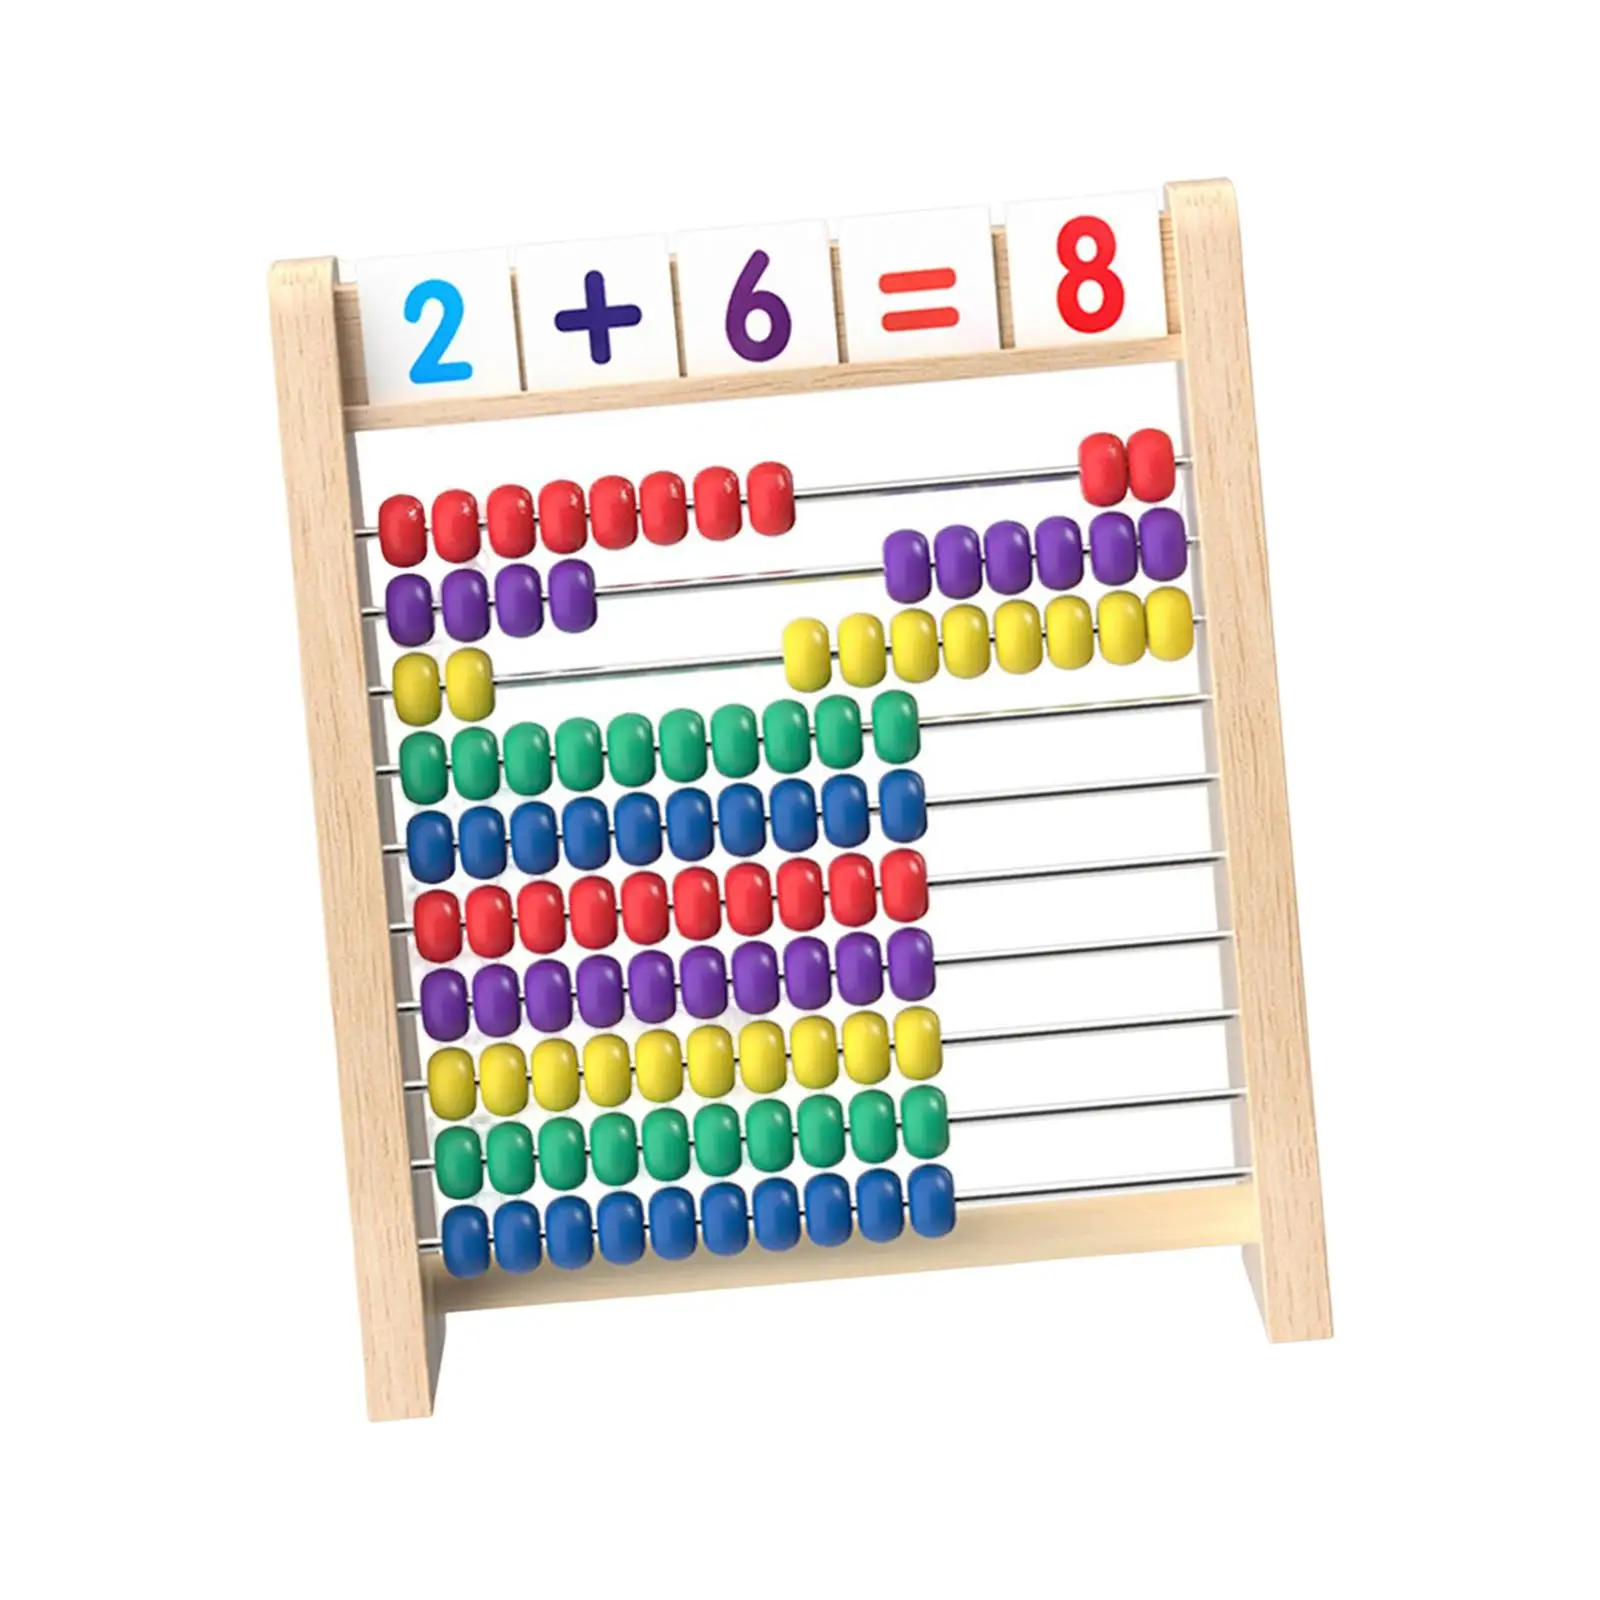 10 Row Wooden Abacus Counting Sticks Counting Educational Preschool Learning Toy for Activity Toys Learning Preschool